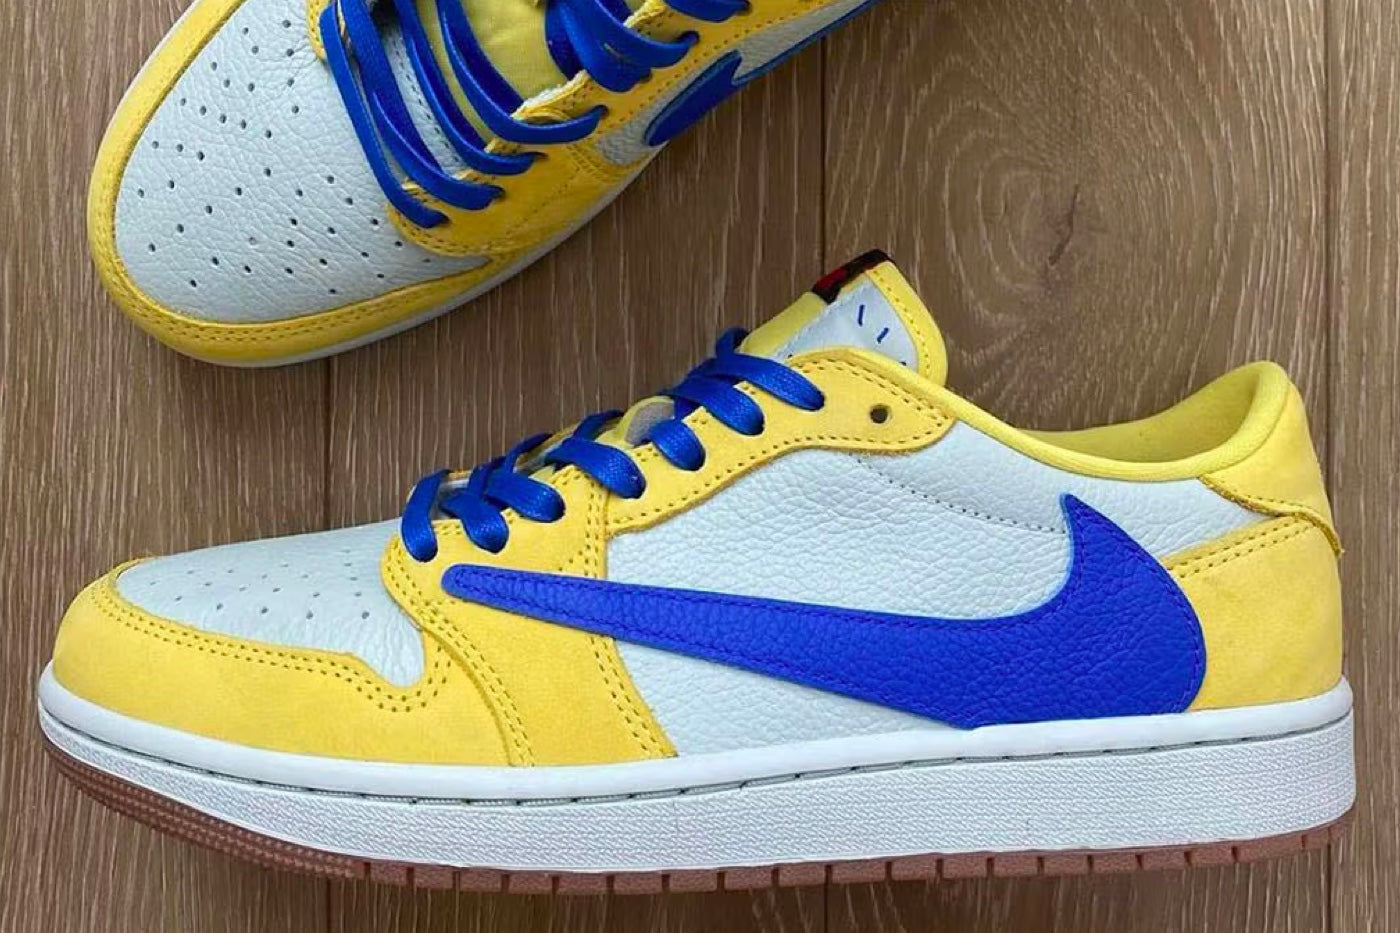 The Travis Scott x Air Jordan 1 Low OG "Canary" is Coming Soon